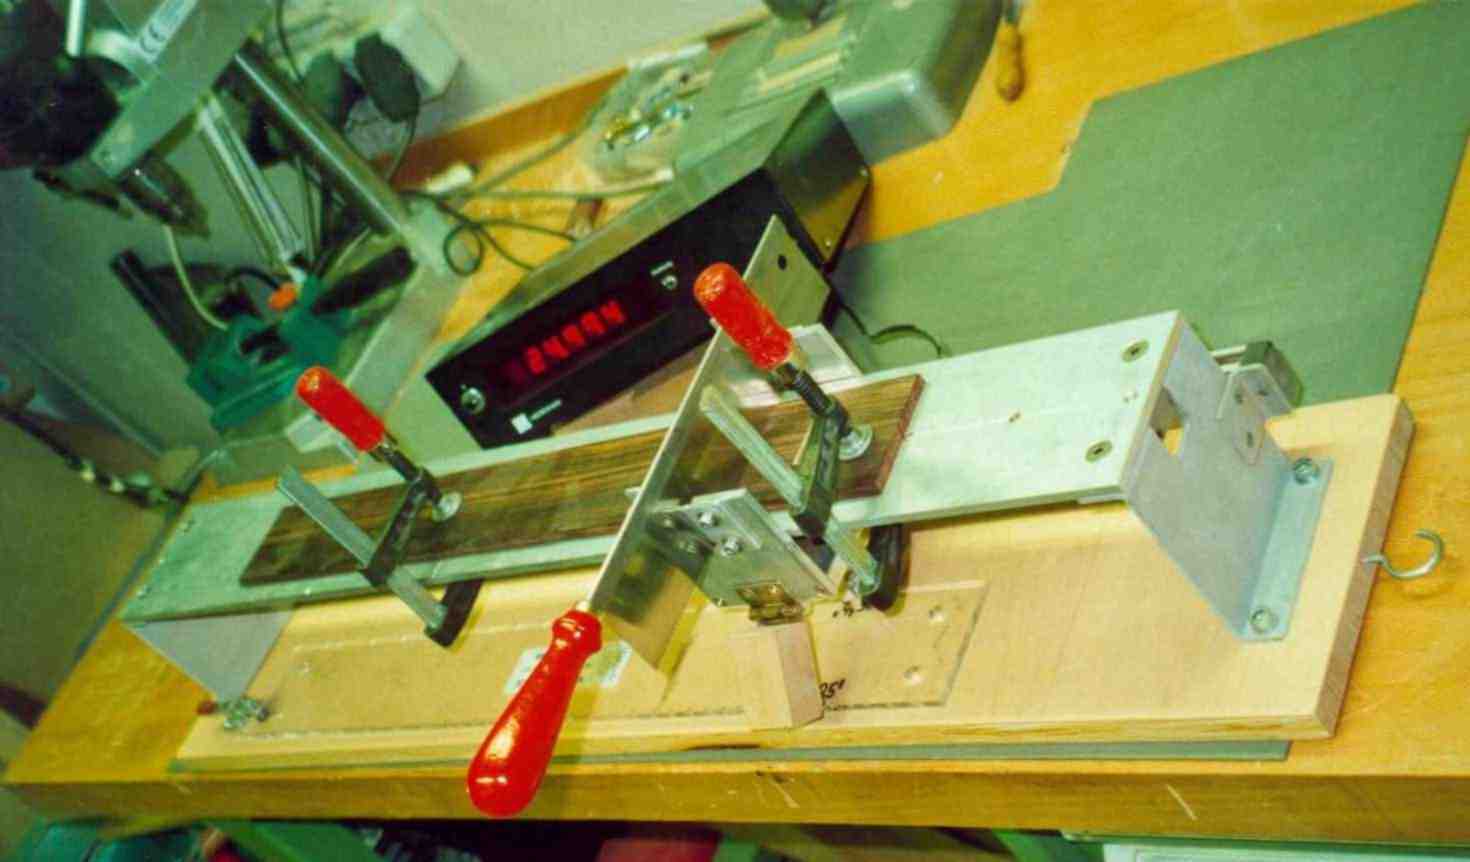 Structure 1 with handsaw